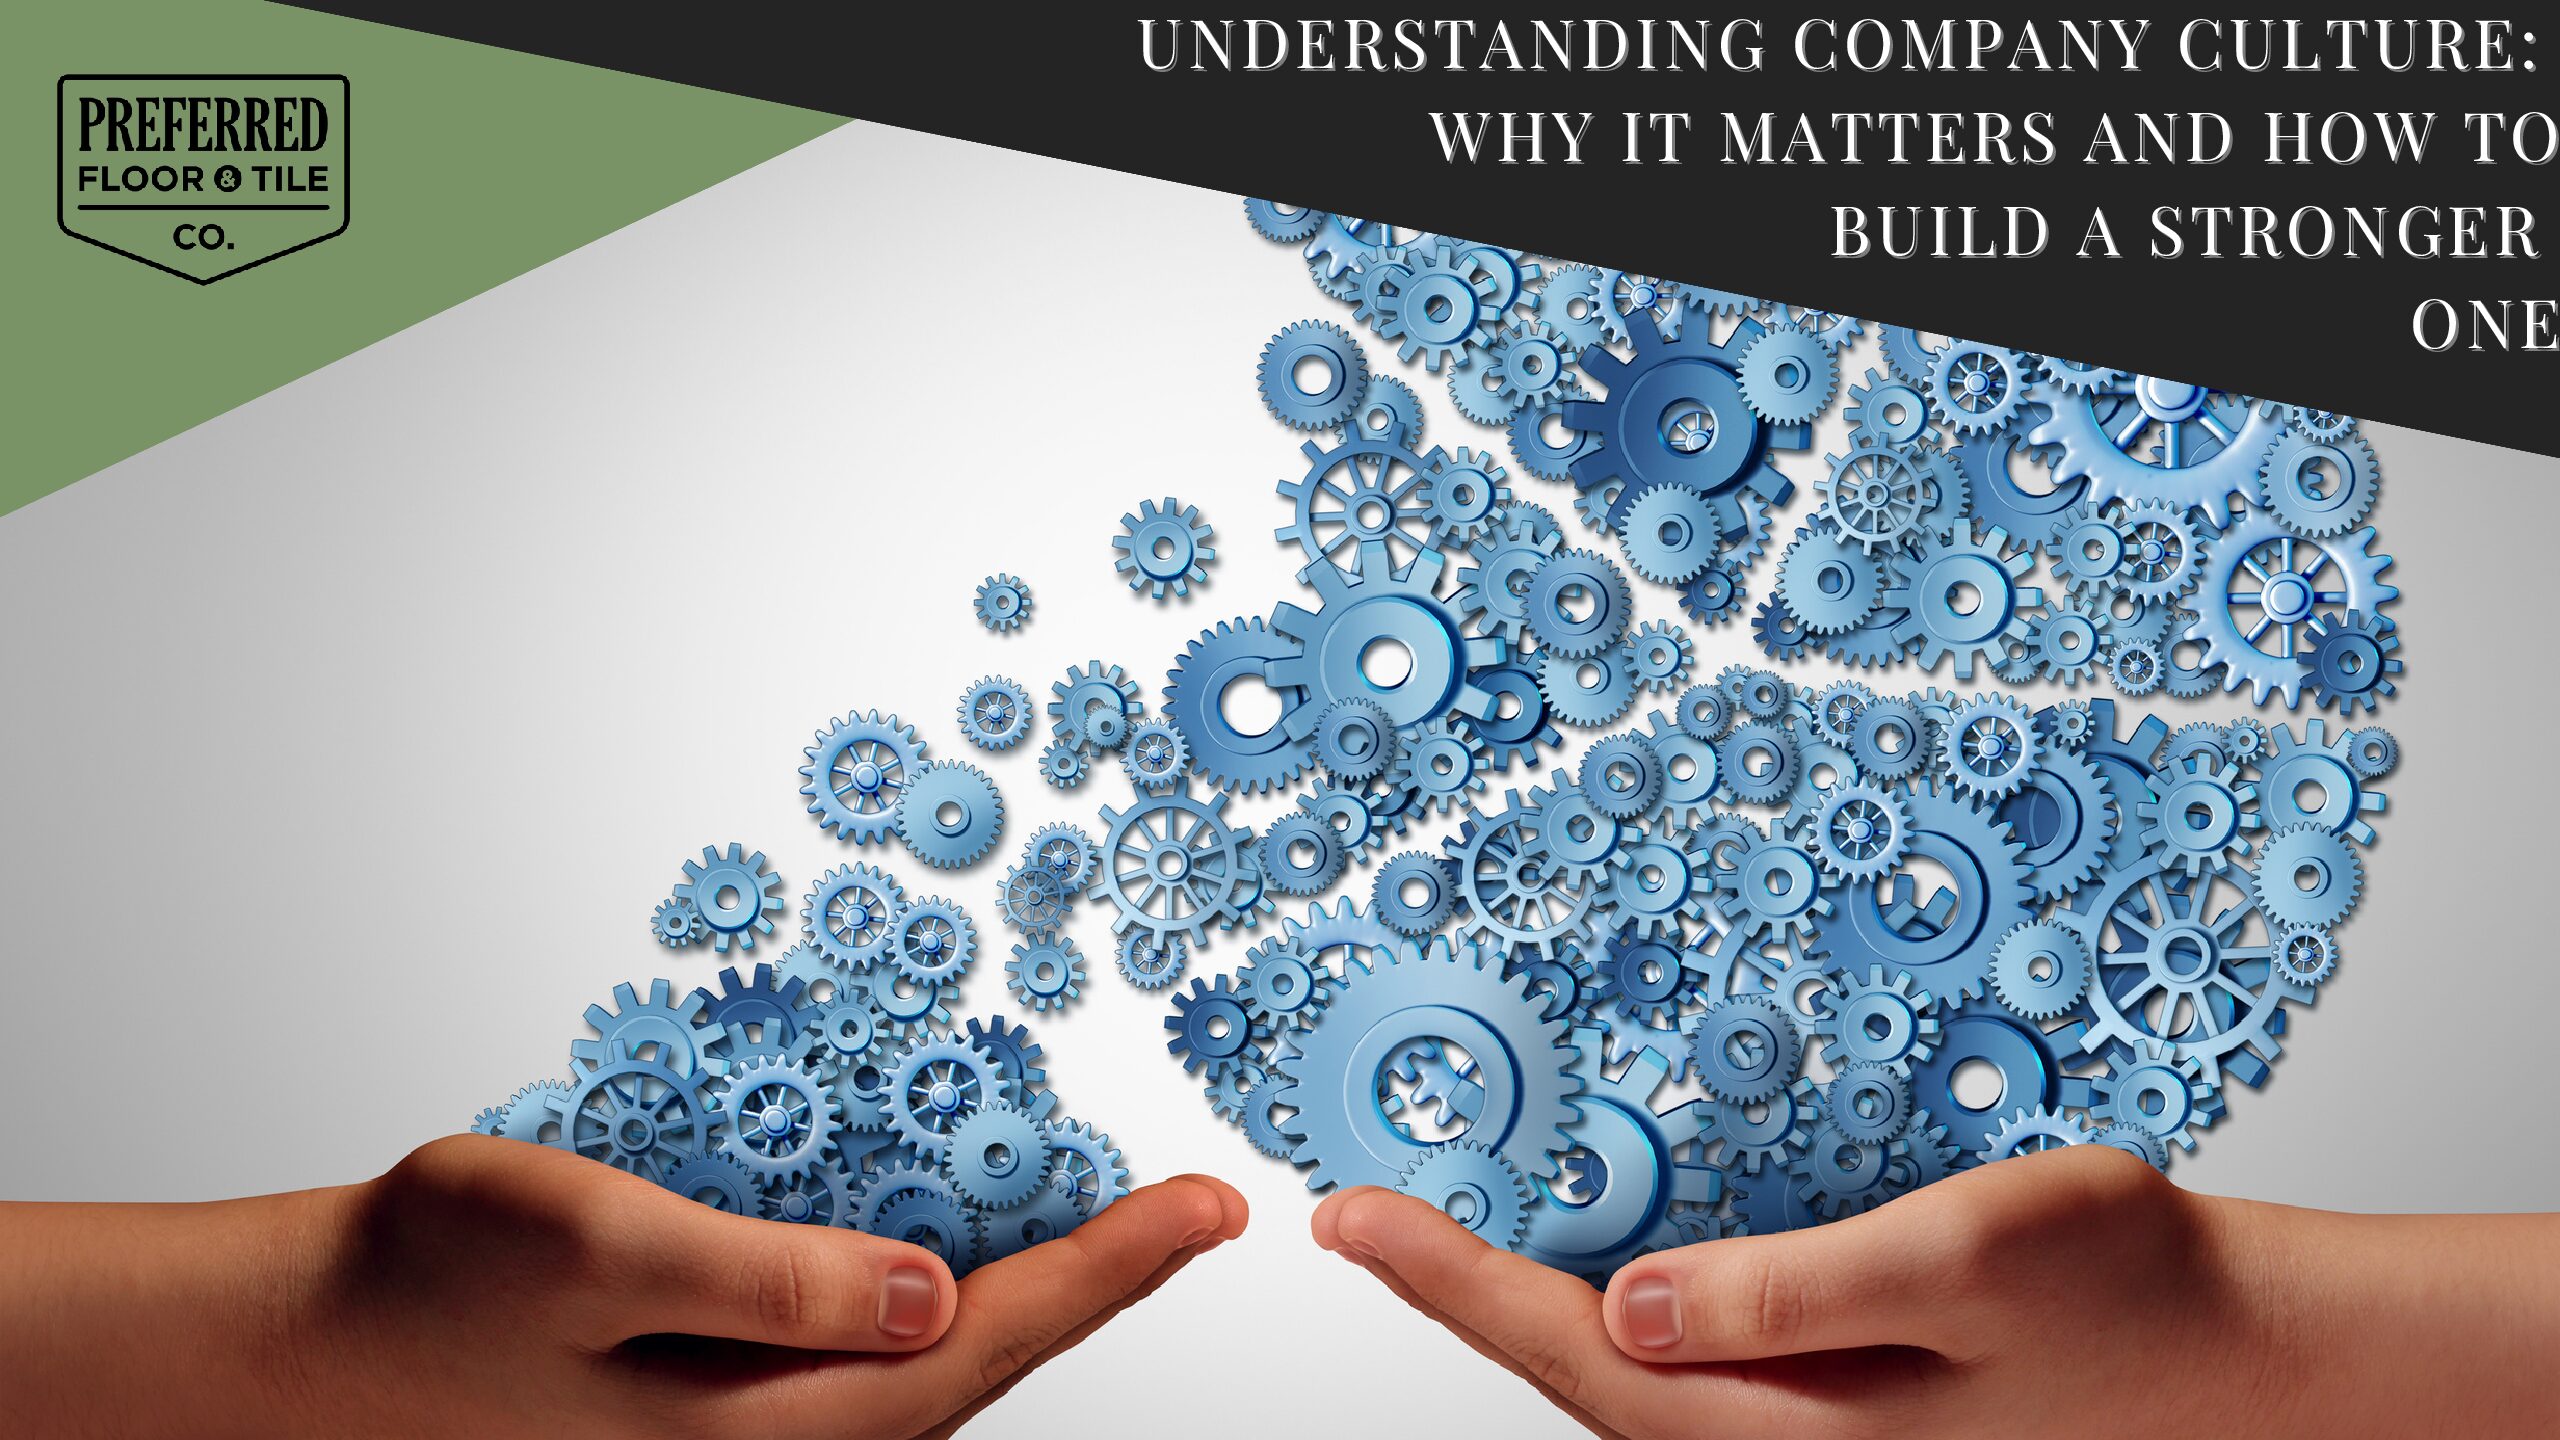 Understanding Company Culture: Why it Matters and How to Build a Stronger One